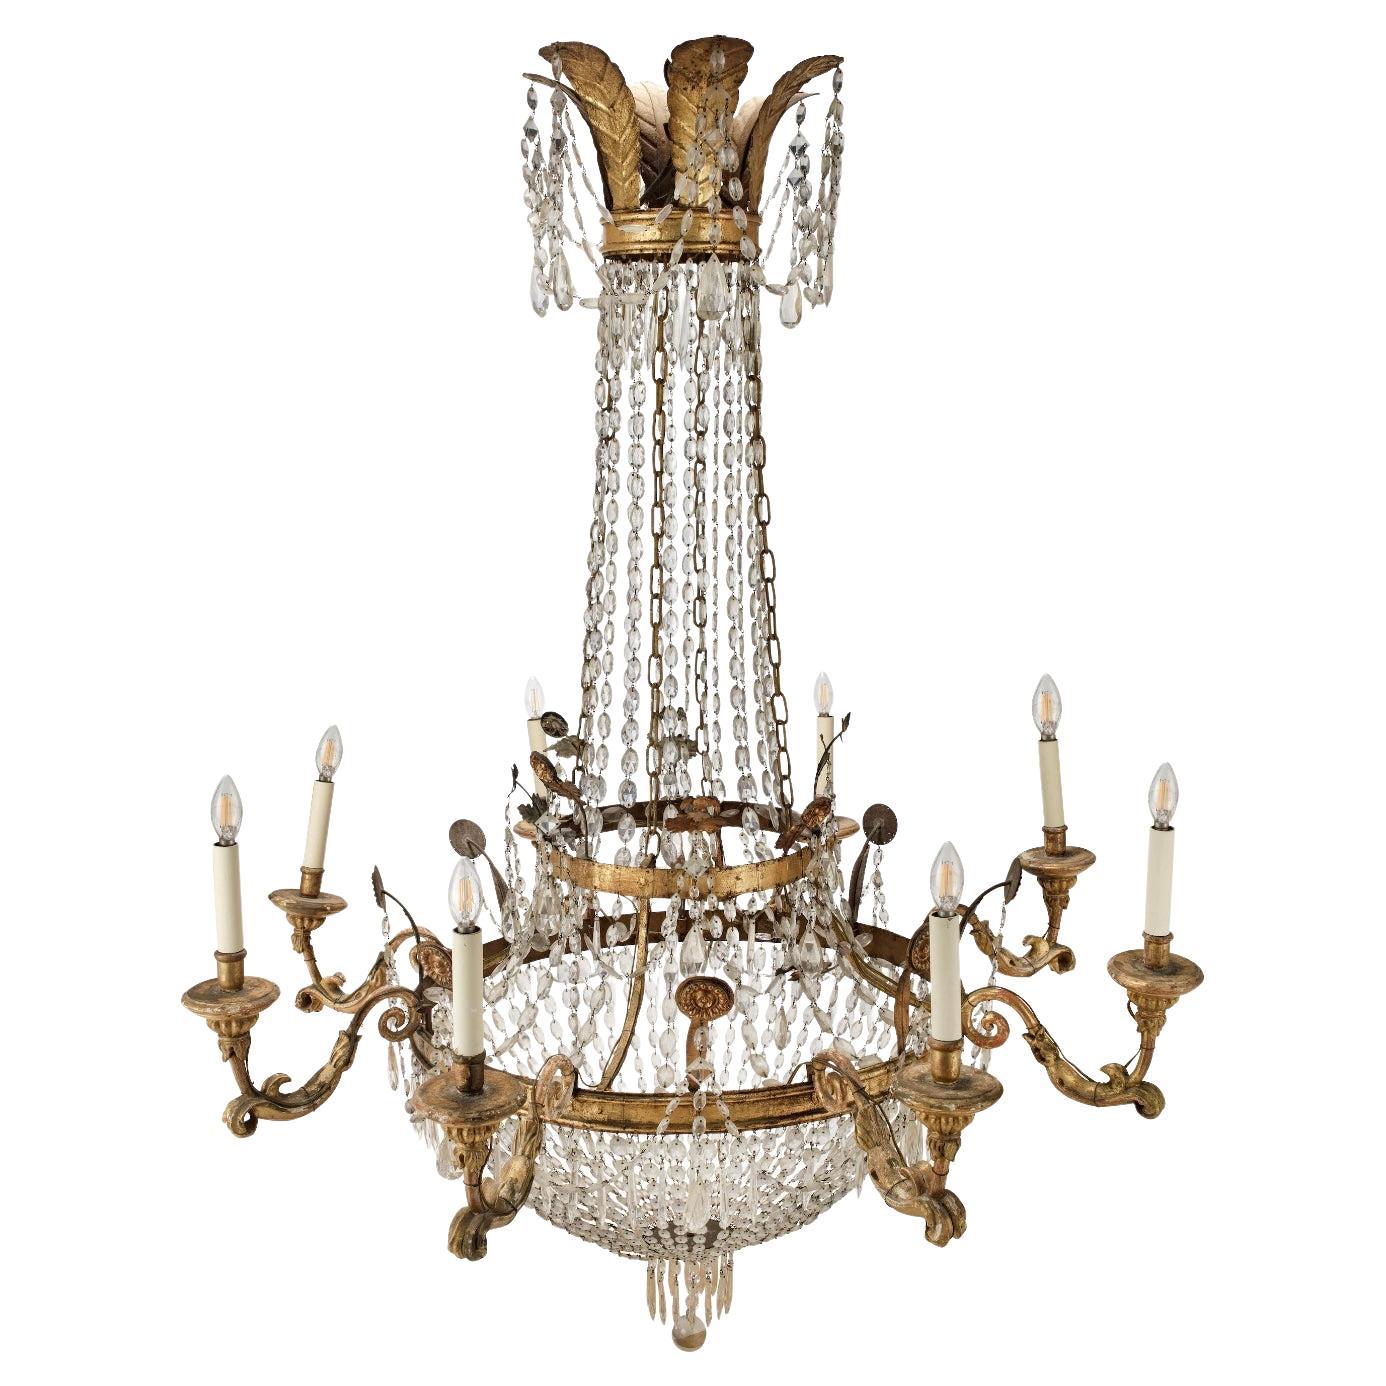 Impressive 19th Century Italian Gilt Carved Wood and Cut Glass Chandelier  For Sale